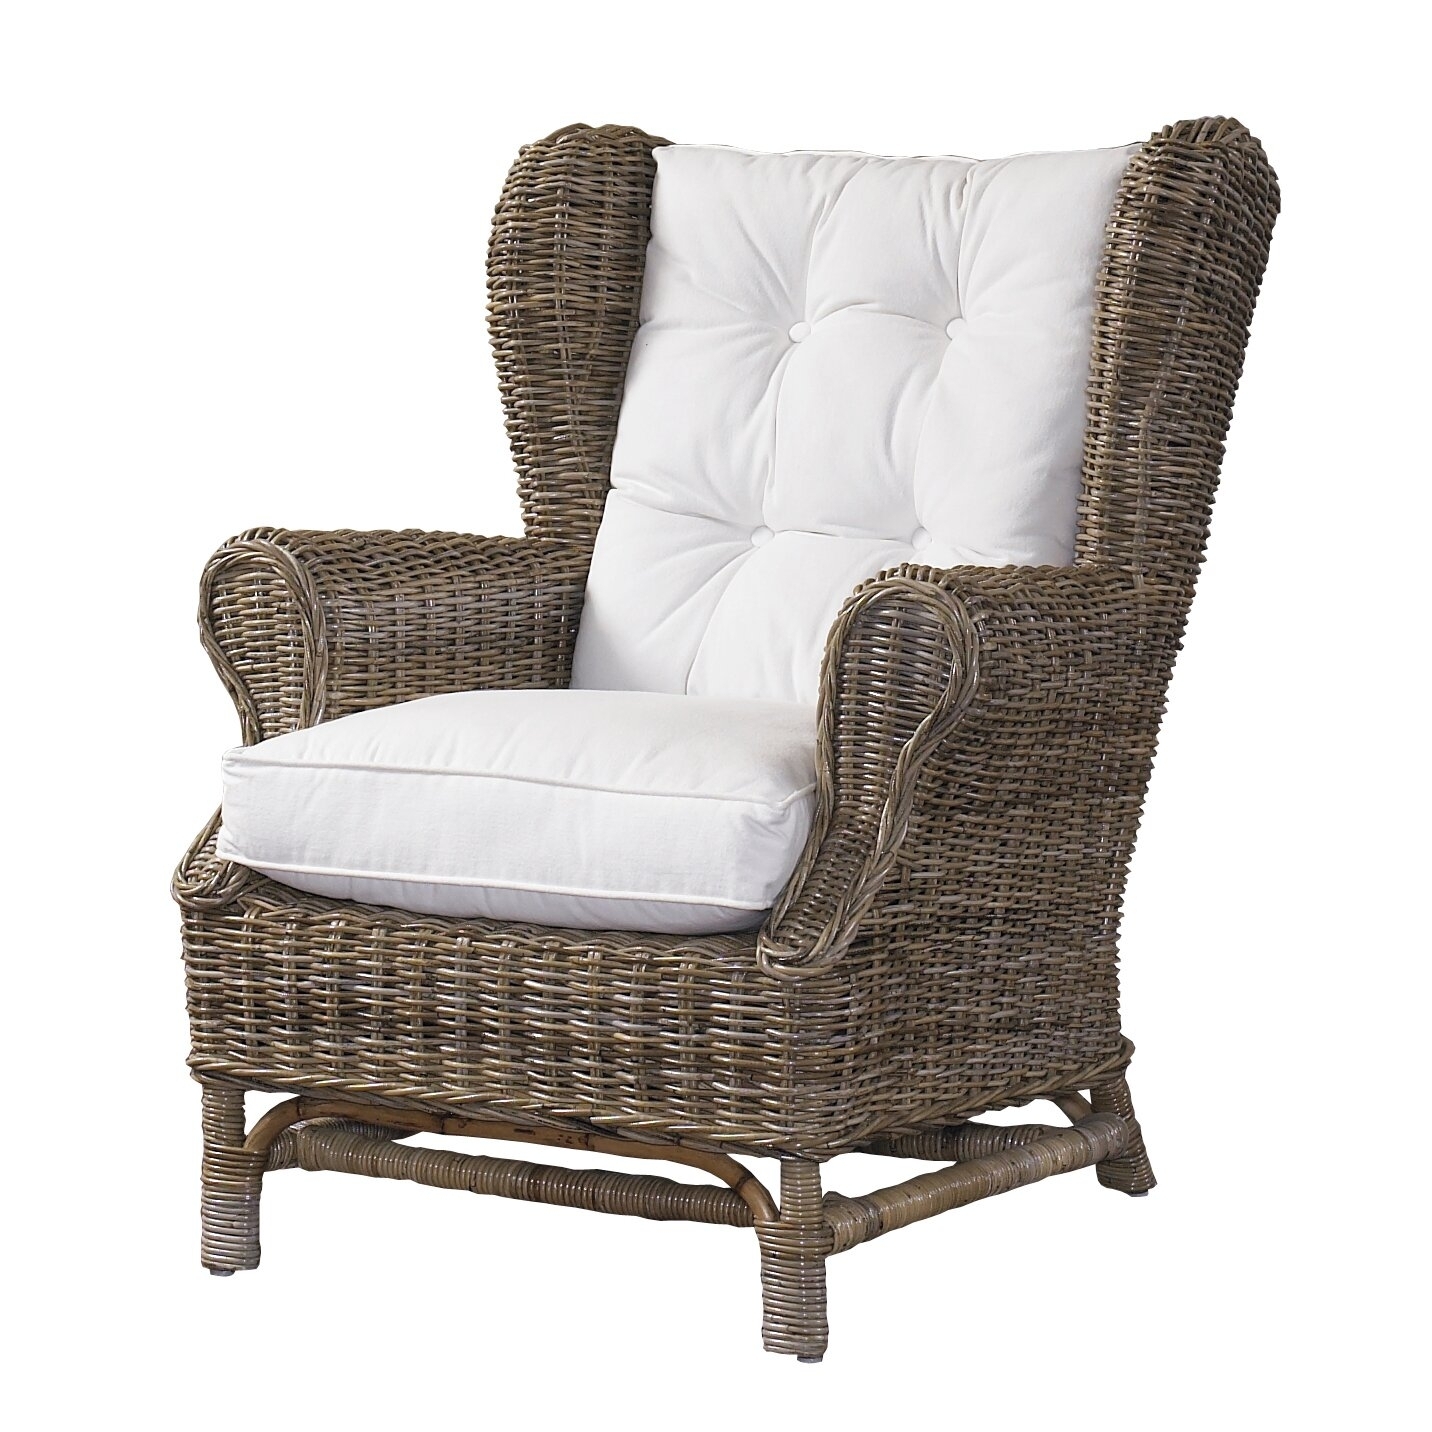 Wicker Wing Chairs - Wicker chairs come in all shapes and sizes.